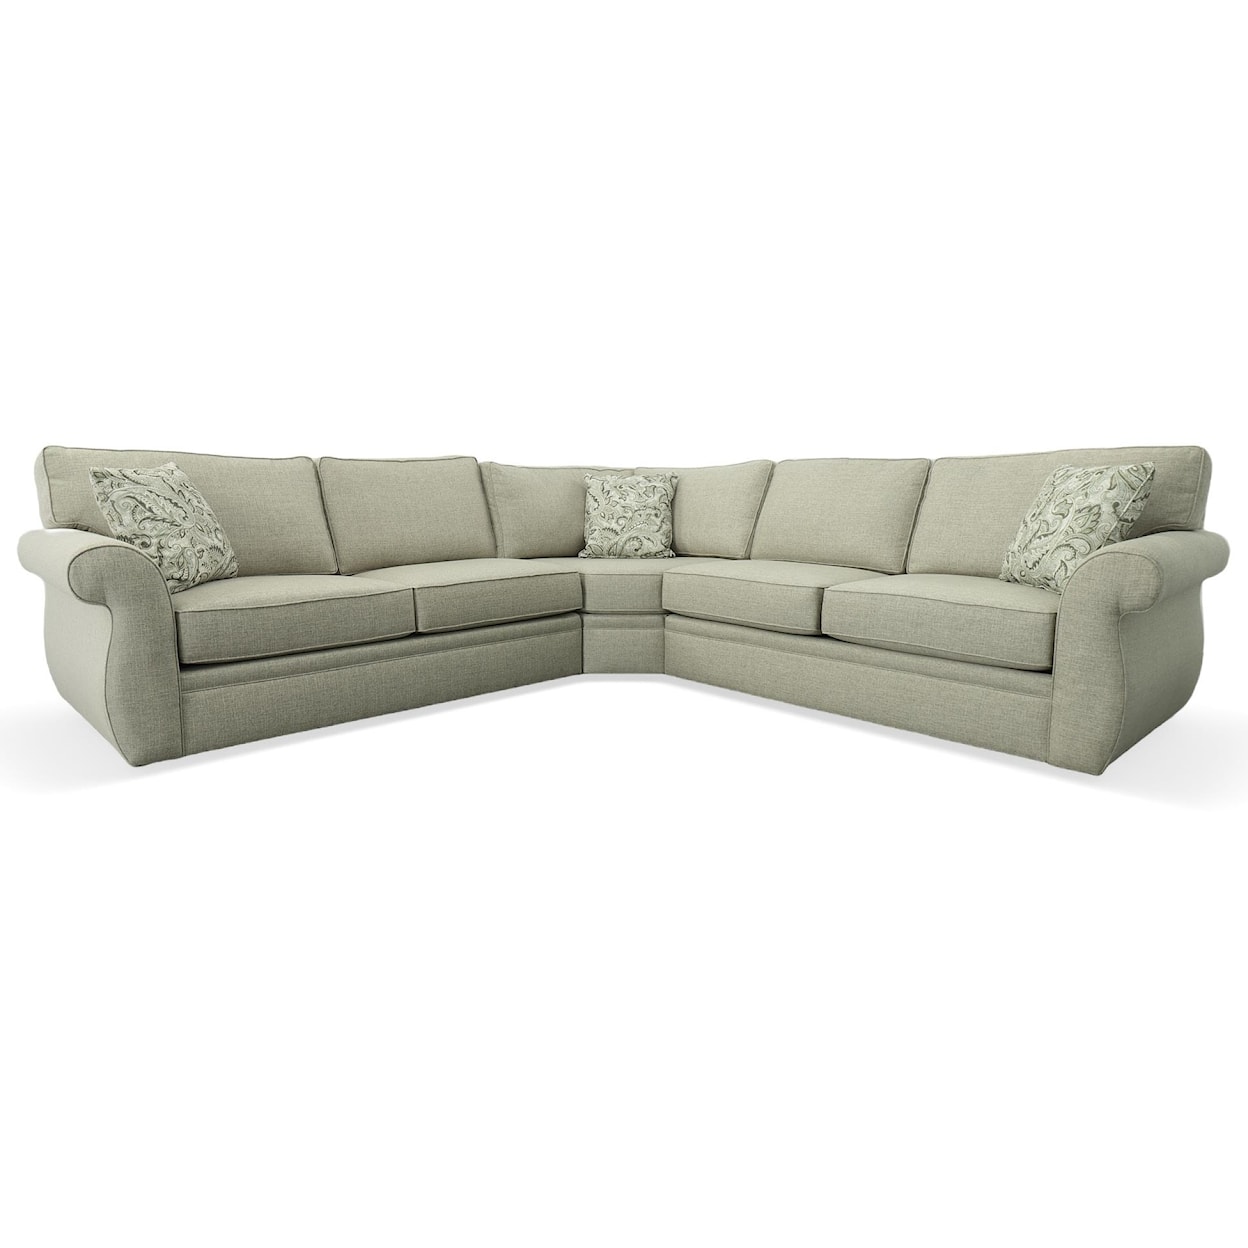 Stone & Leigh Furniture VERONICA 5 Seat Sectional